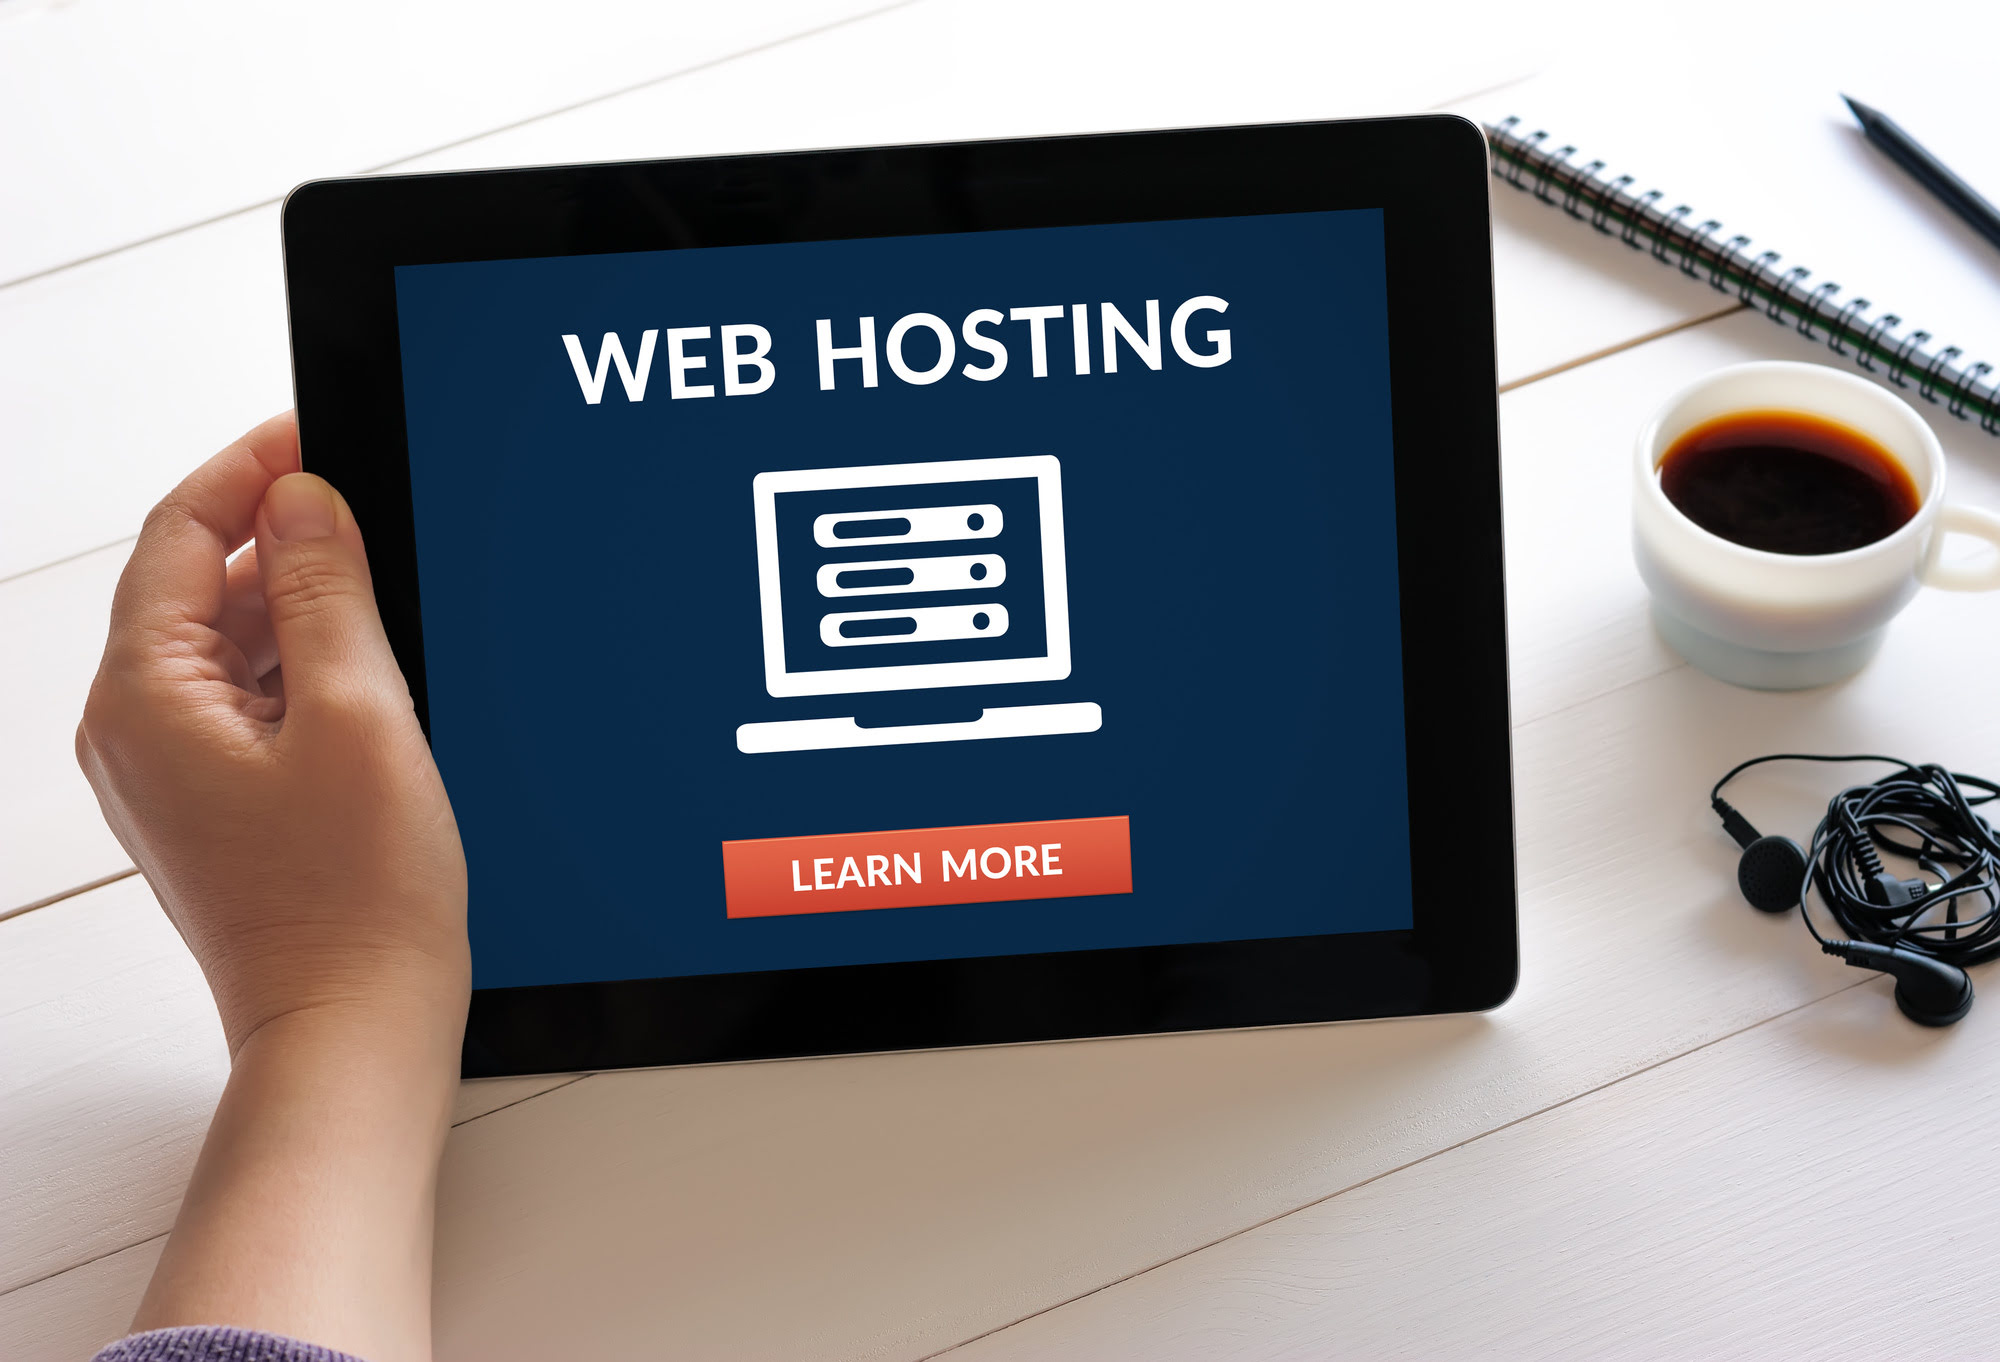 Business Web Hosting vs Web Building: Which One Do You Need?